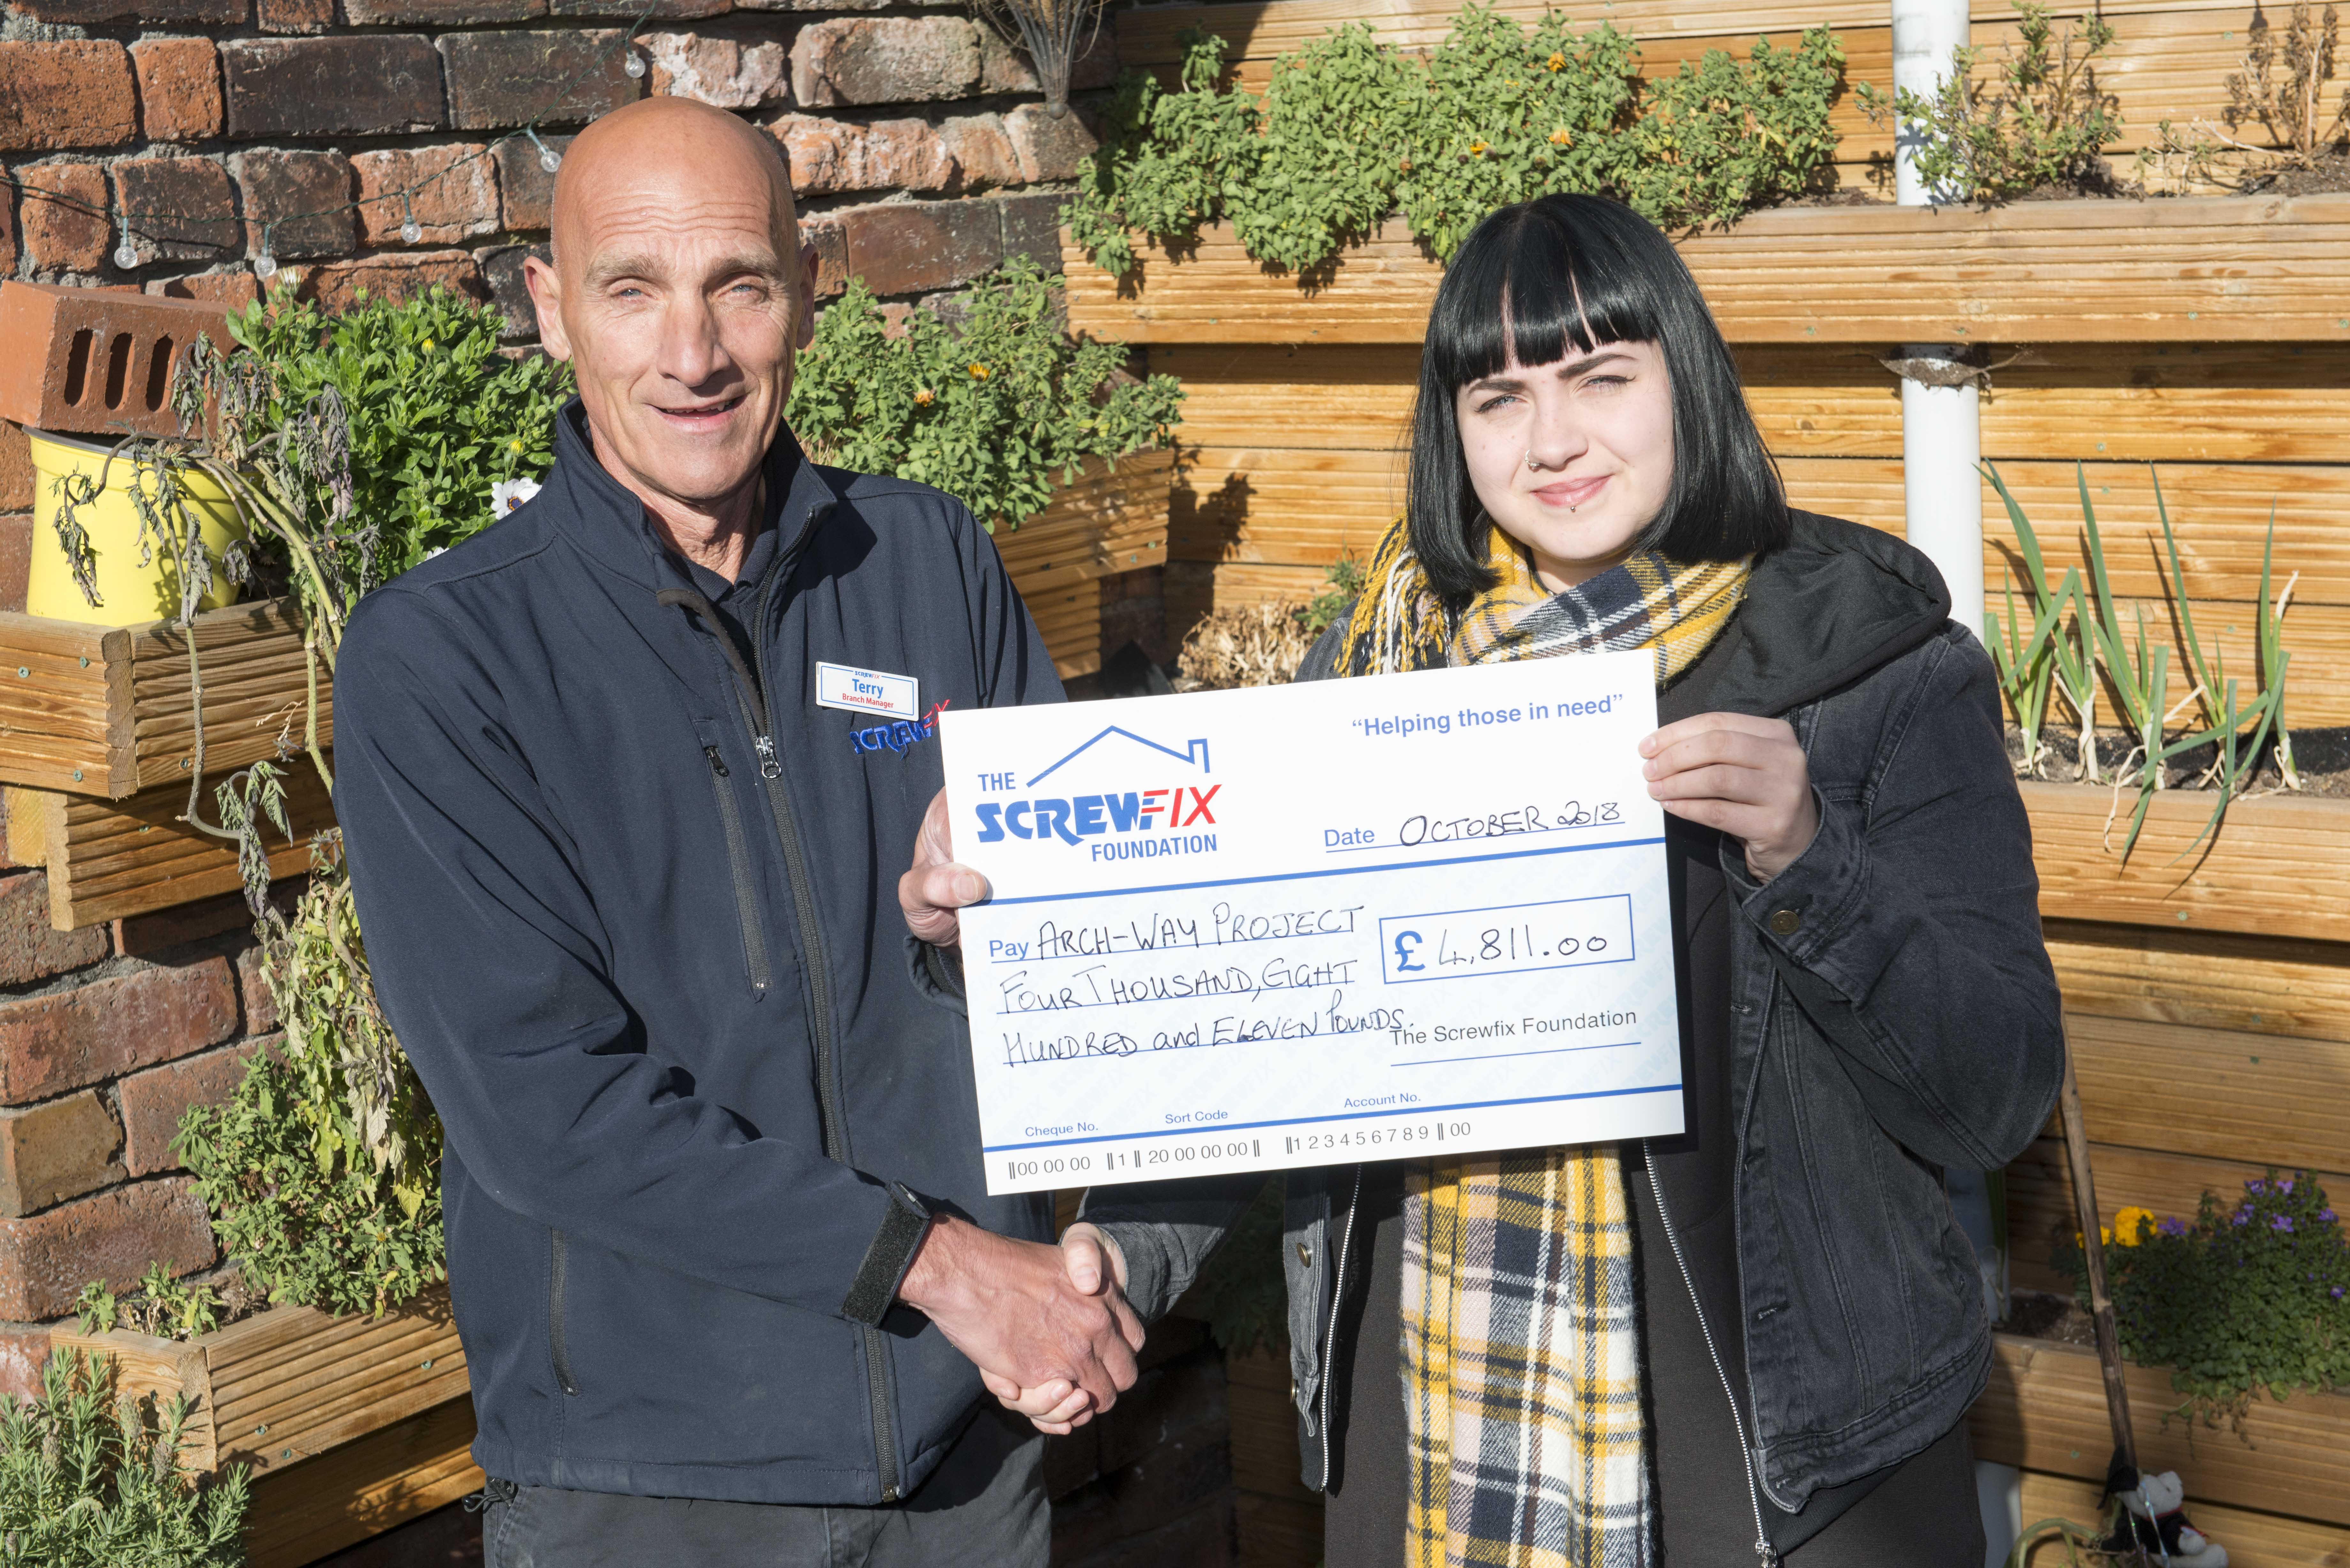 The Screwfix Foundation supports the Arch-Way Project in Halifax